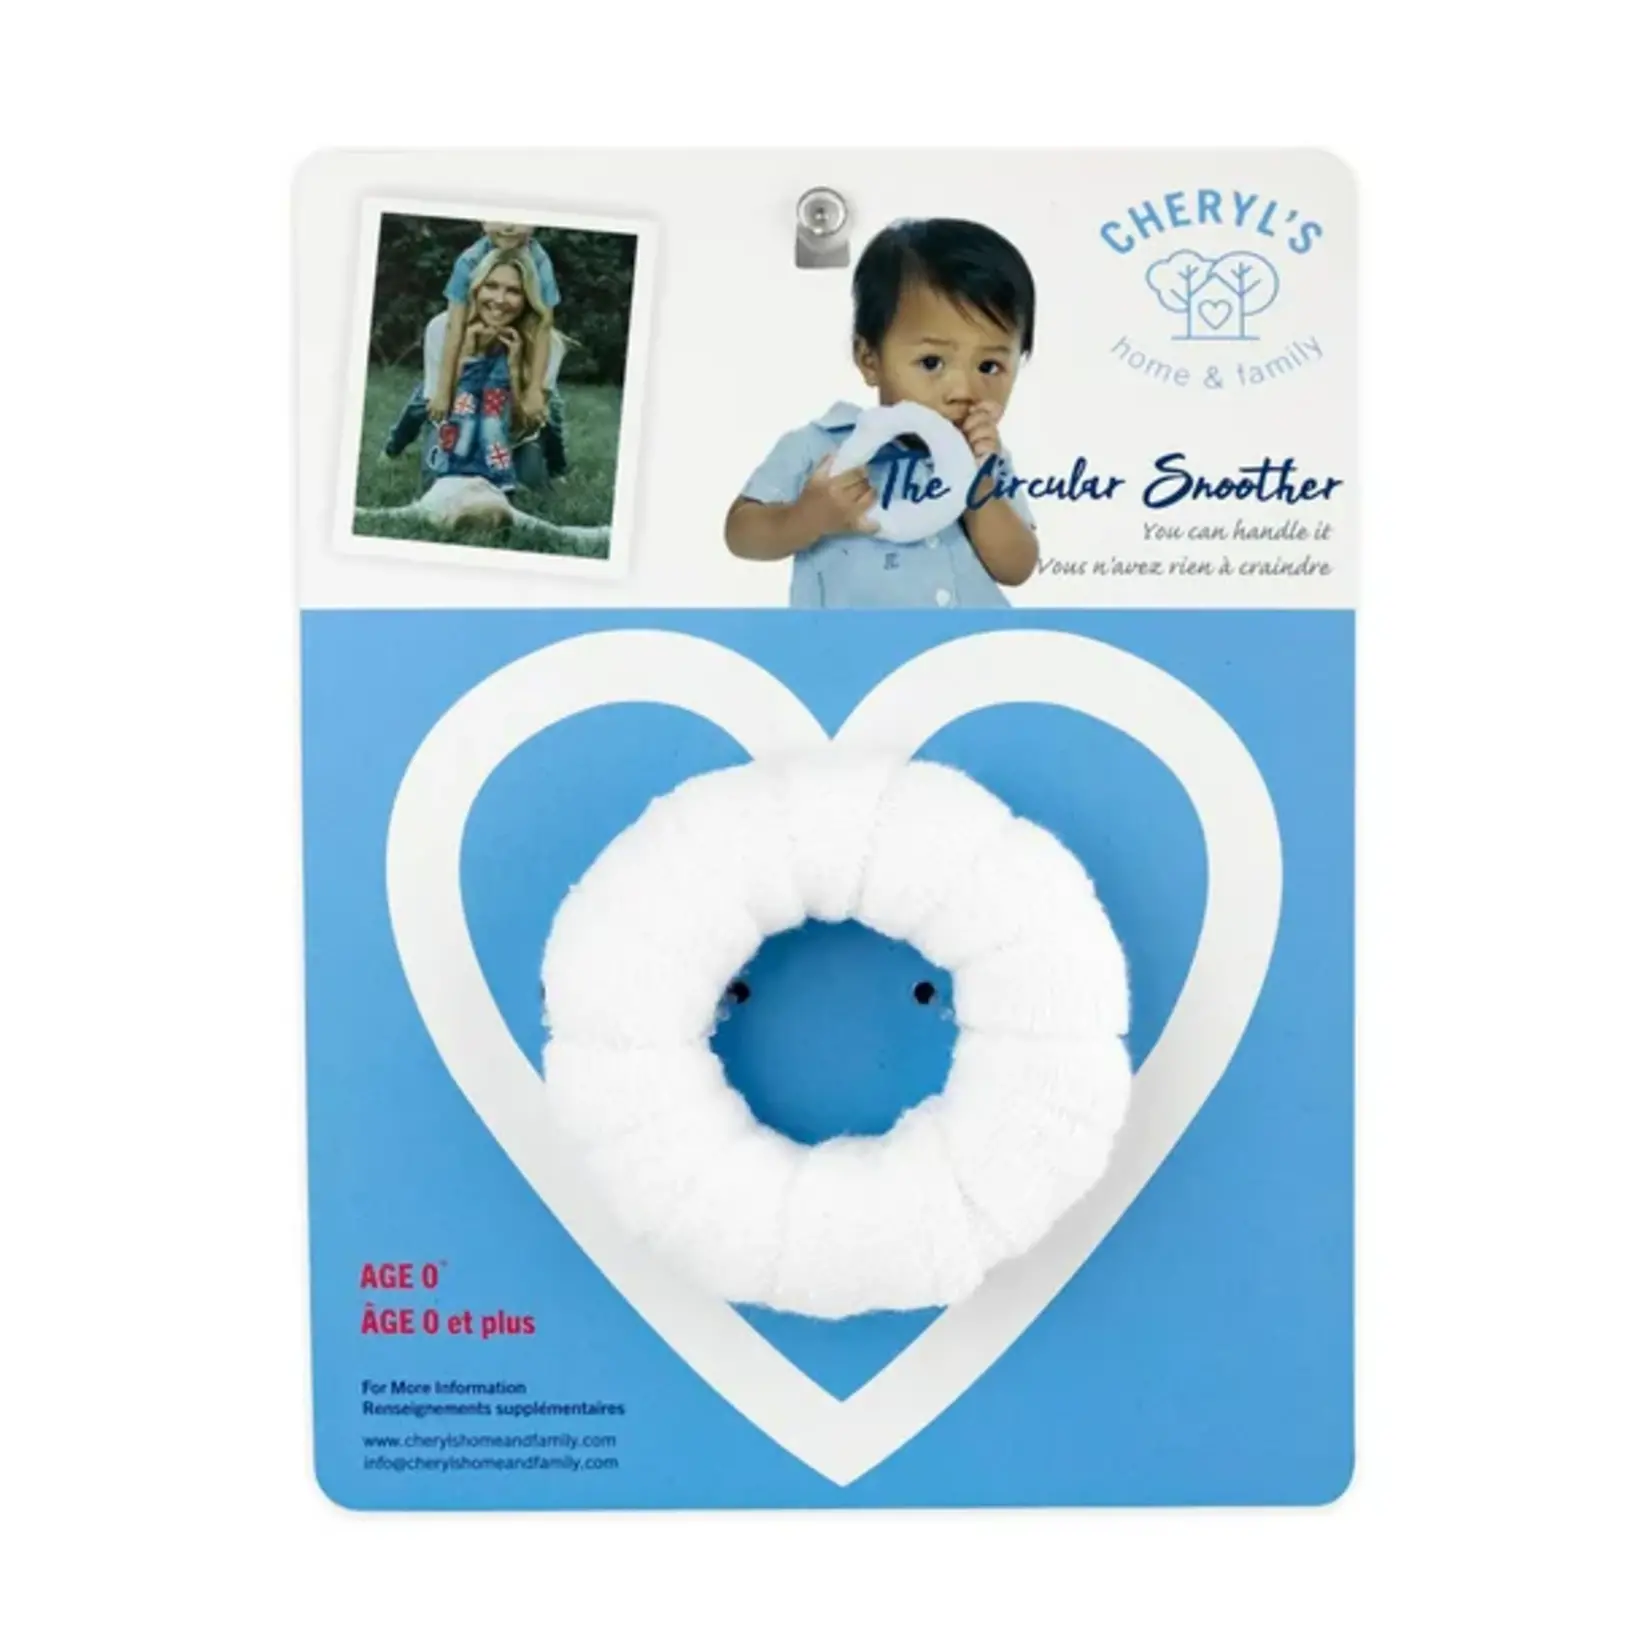 Cheryl's Home & Family The snoother circular teether